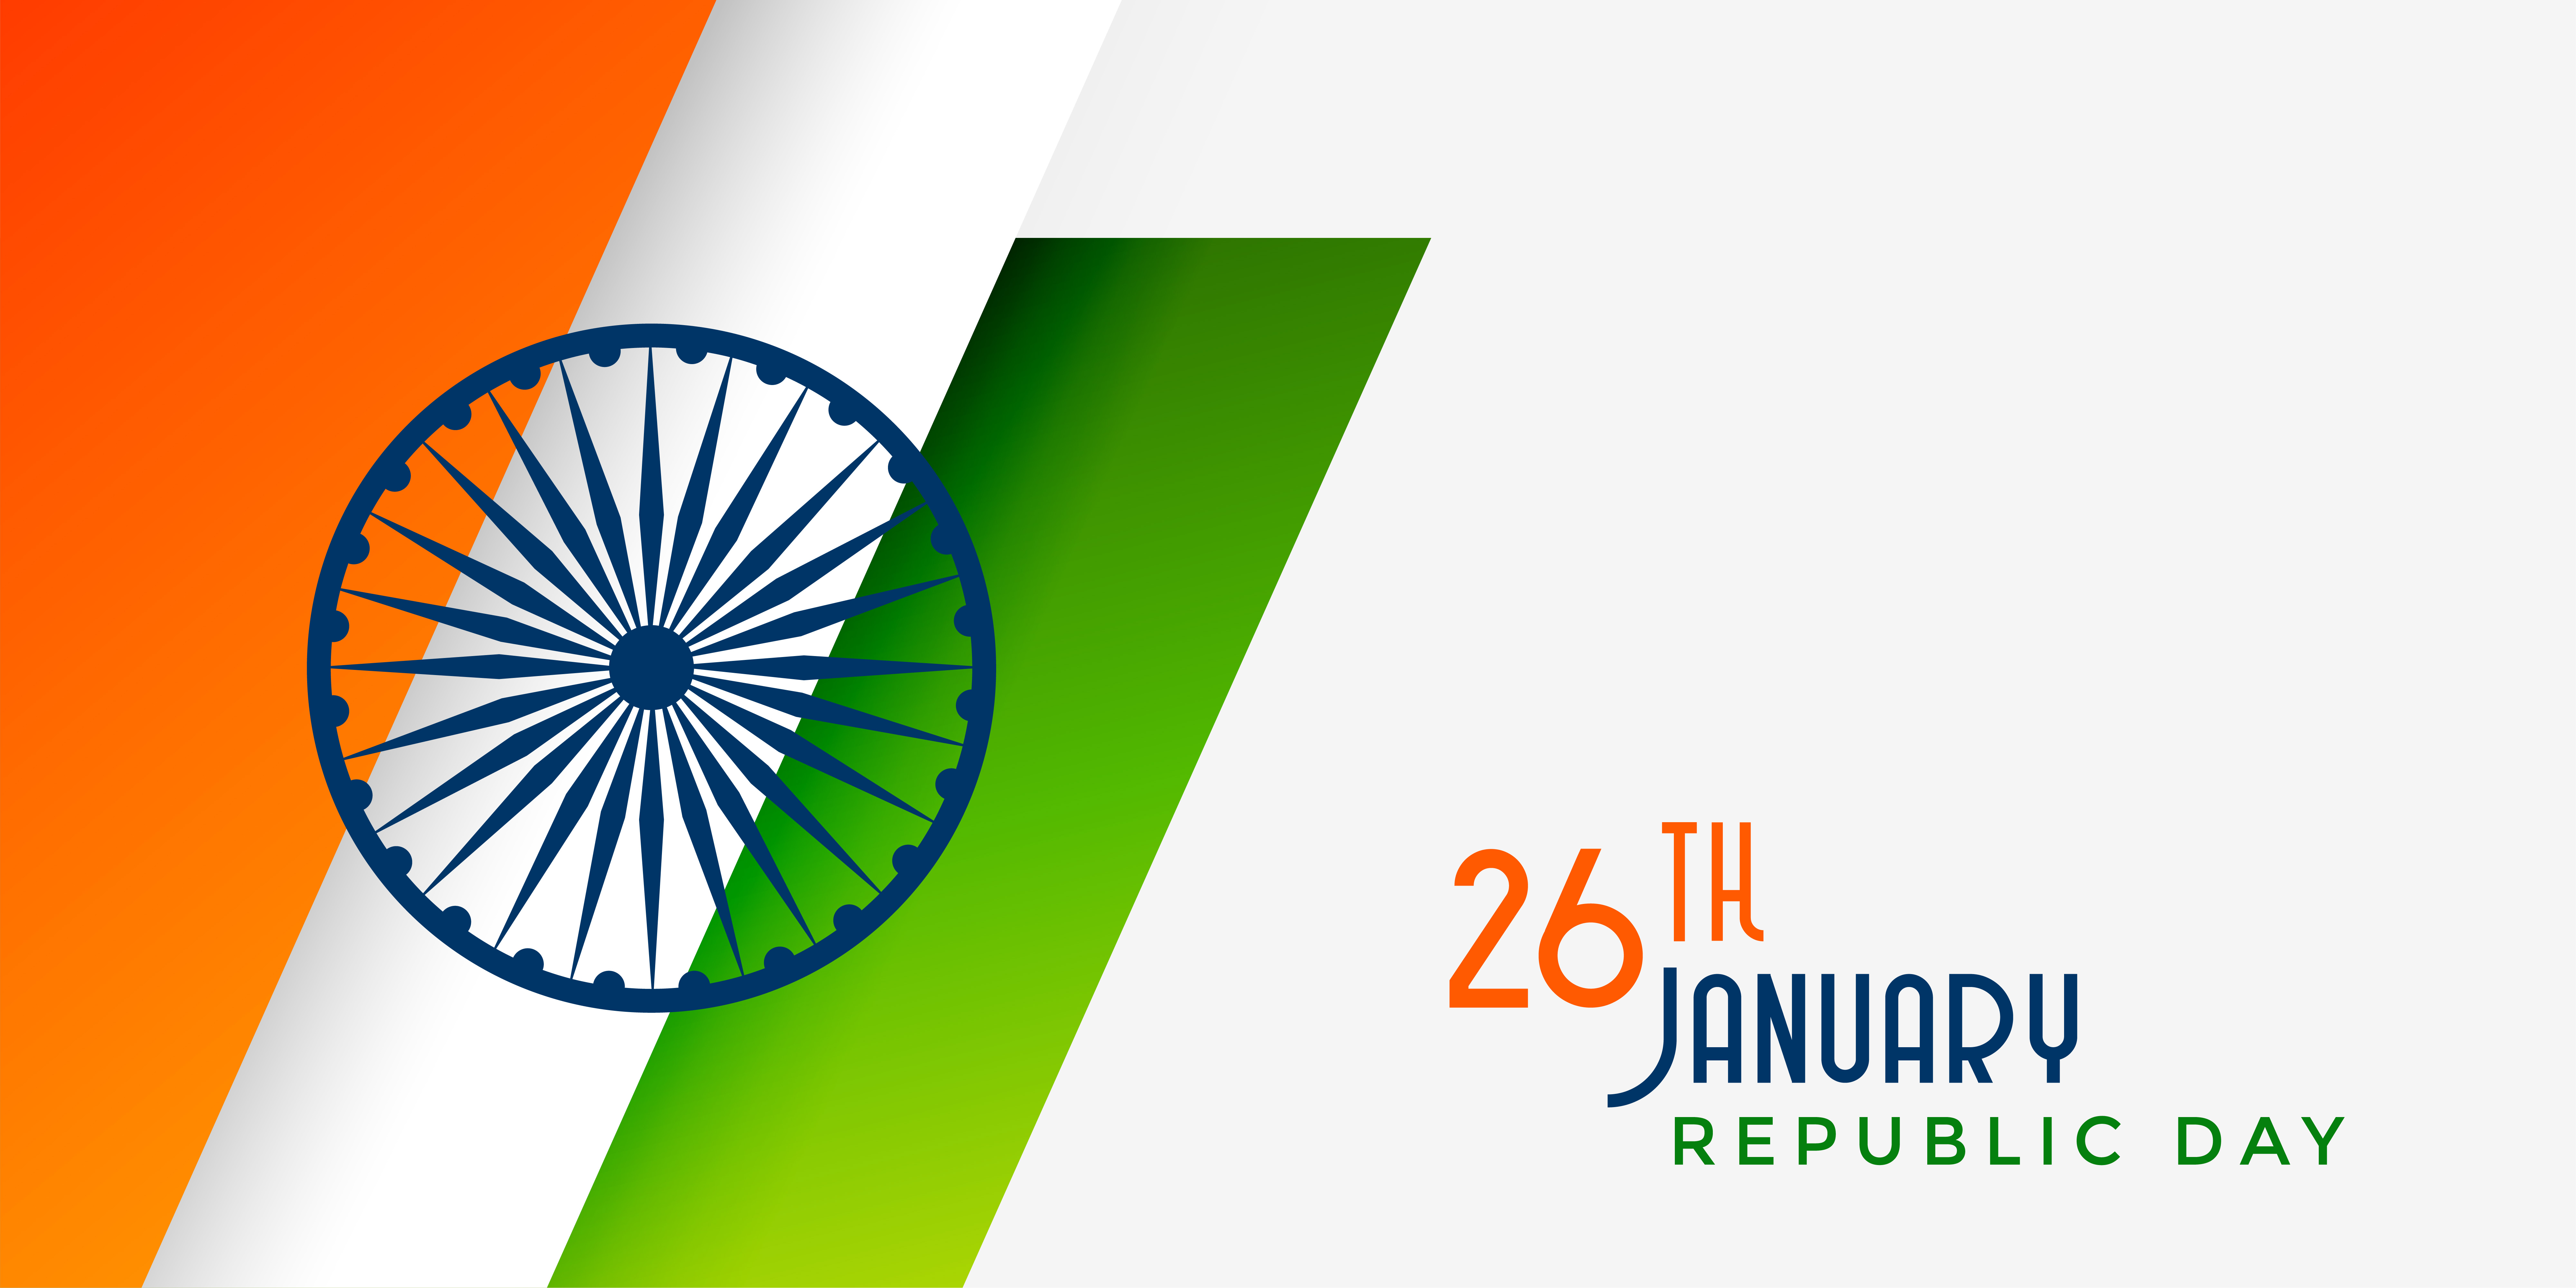 happy republic day indian flag banner design Download Free Vector Art